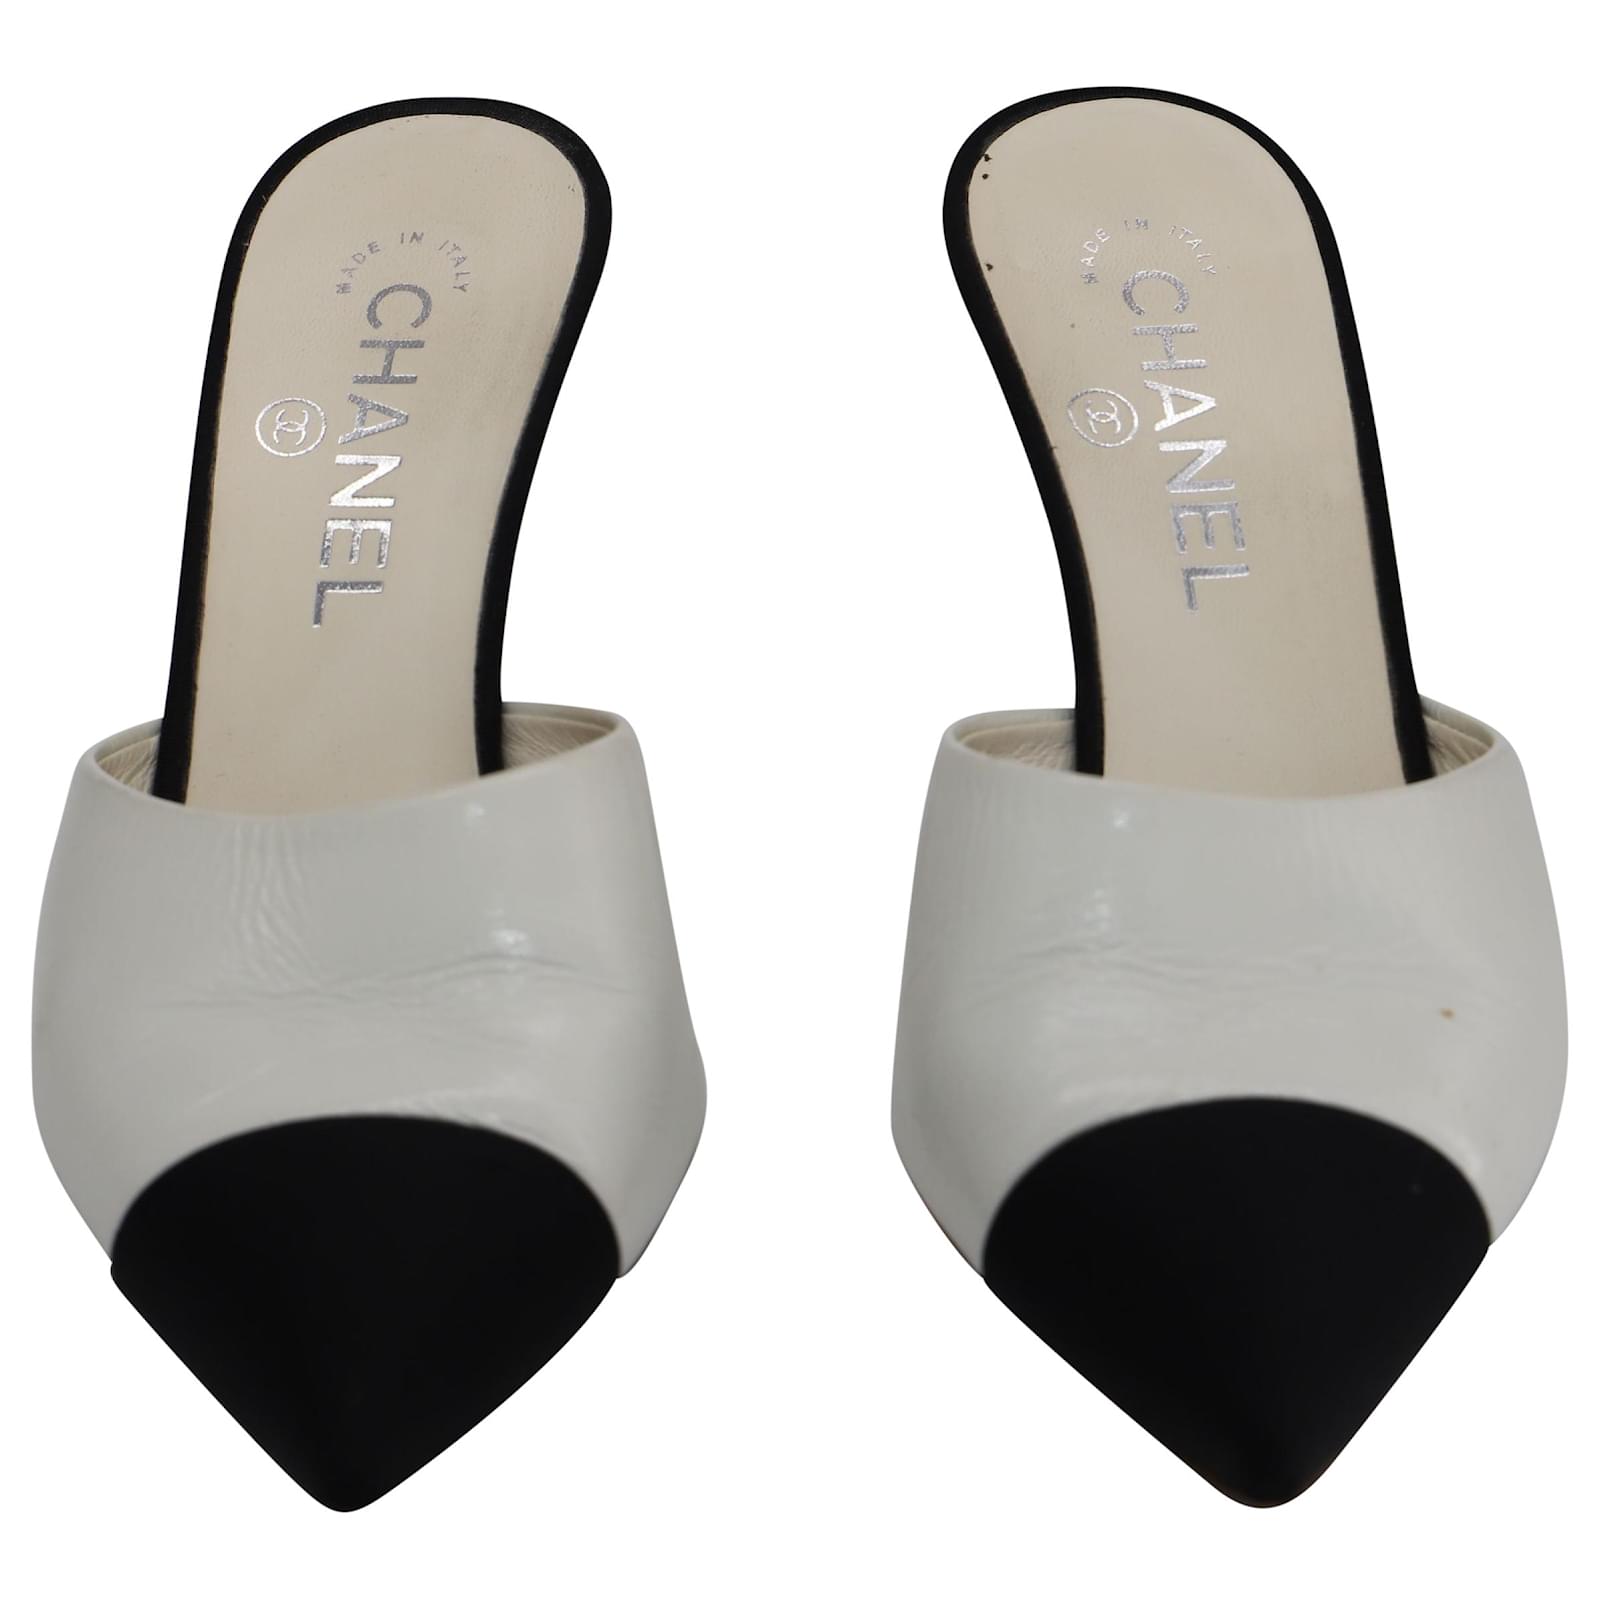 Timeless Chanel Cap Toe Mules with Pearl-Embedded Heels in White Leather  Black ref.469307 - Joli Closet